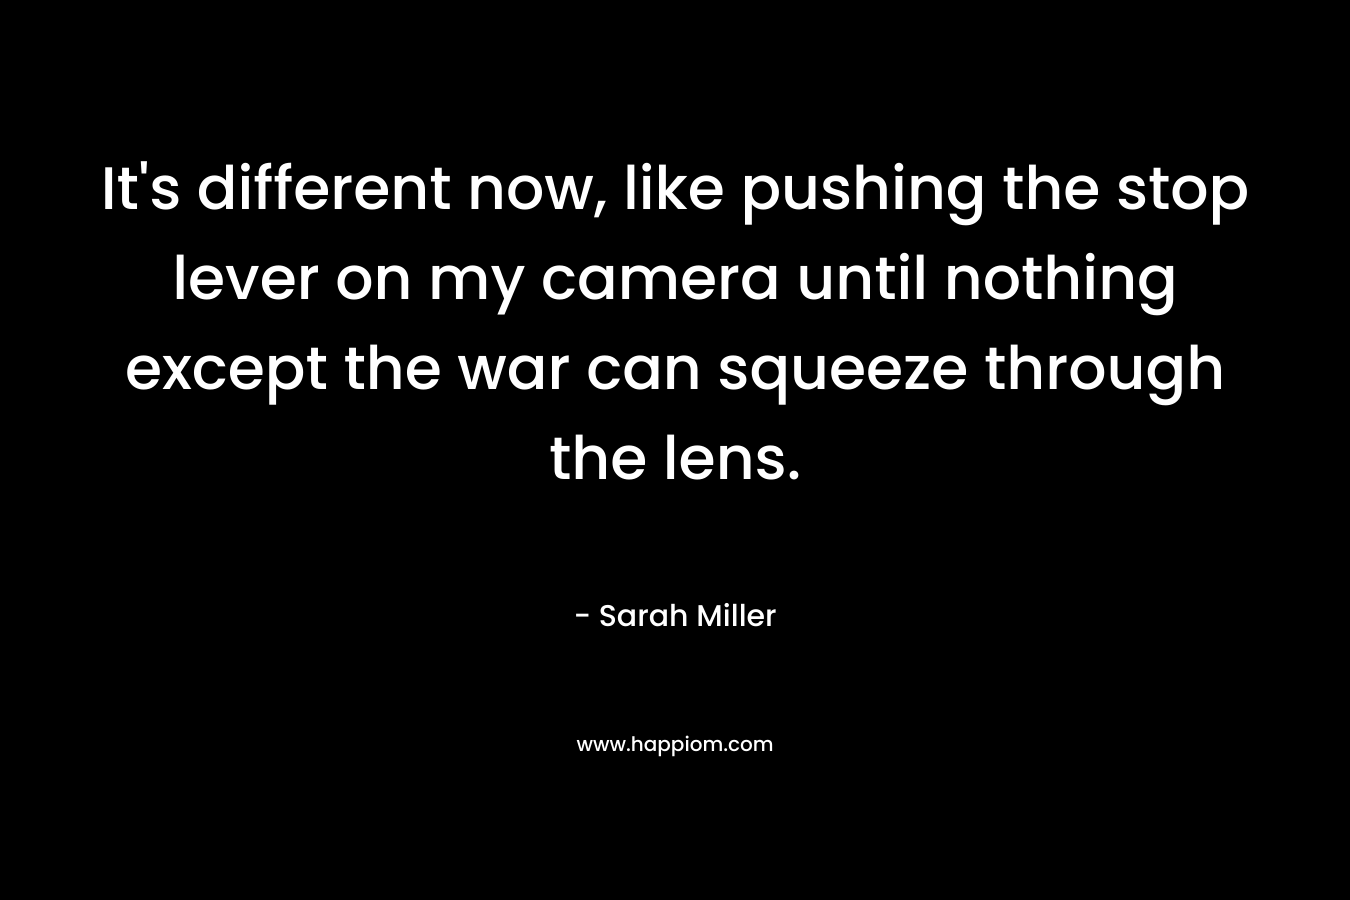 It's different now, like pushing the stop lever on my camera until nothing except the war can squeeze through the lens.